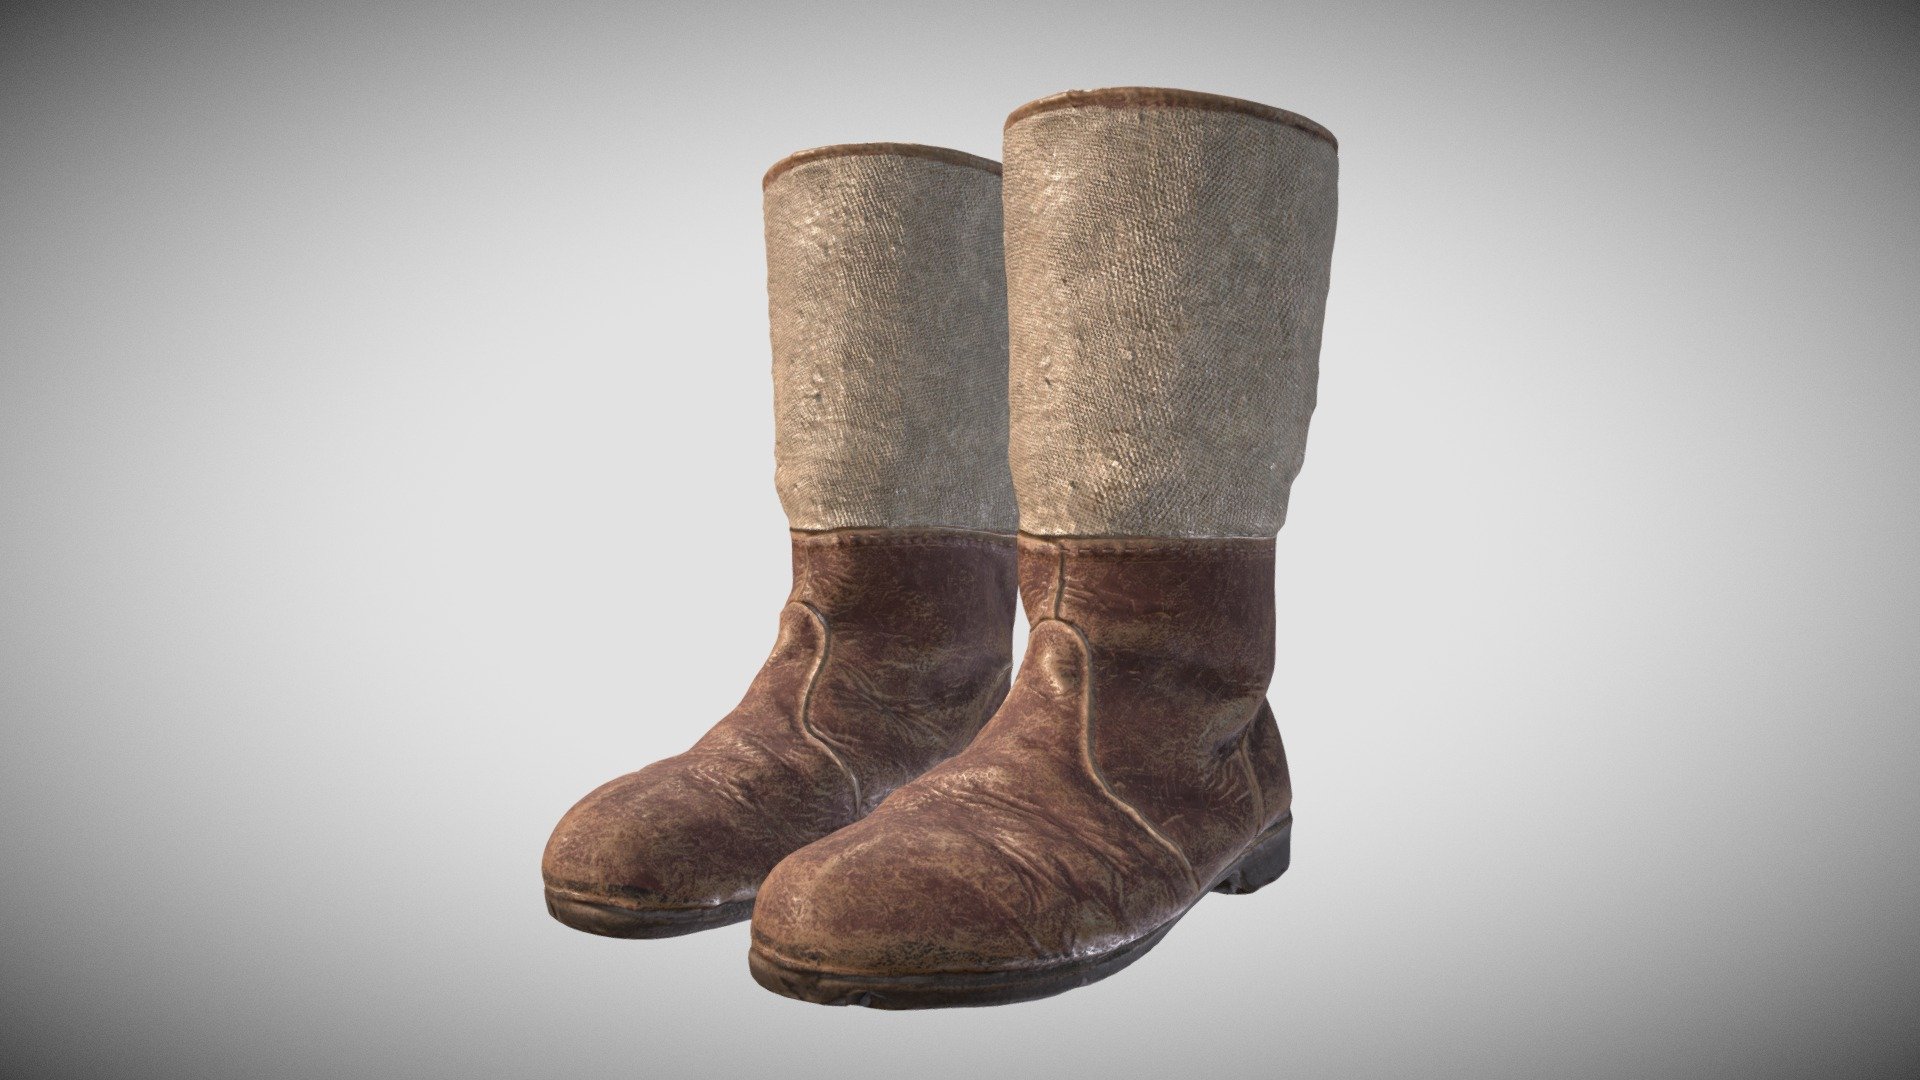 Low Poly Boots
From nice 3D Scan, here the Optimized Version Painted - Leather Boots - 3D model by Francesco Coldesina (@topfrank2013) 3d model